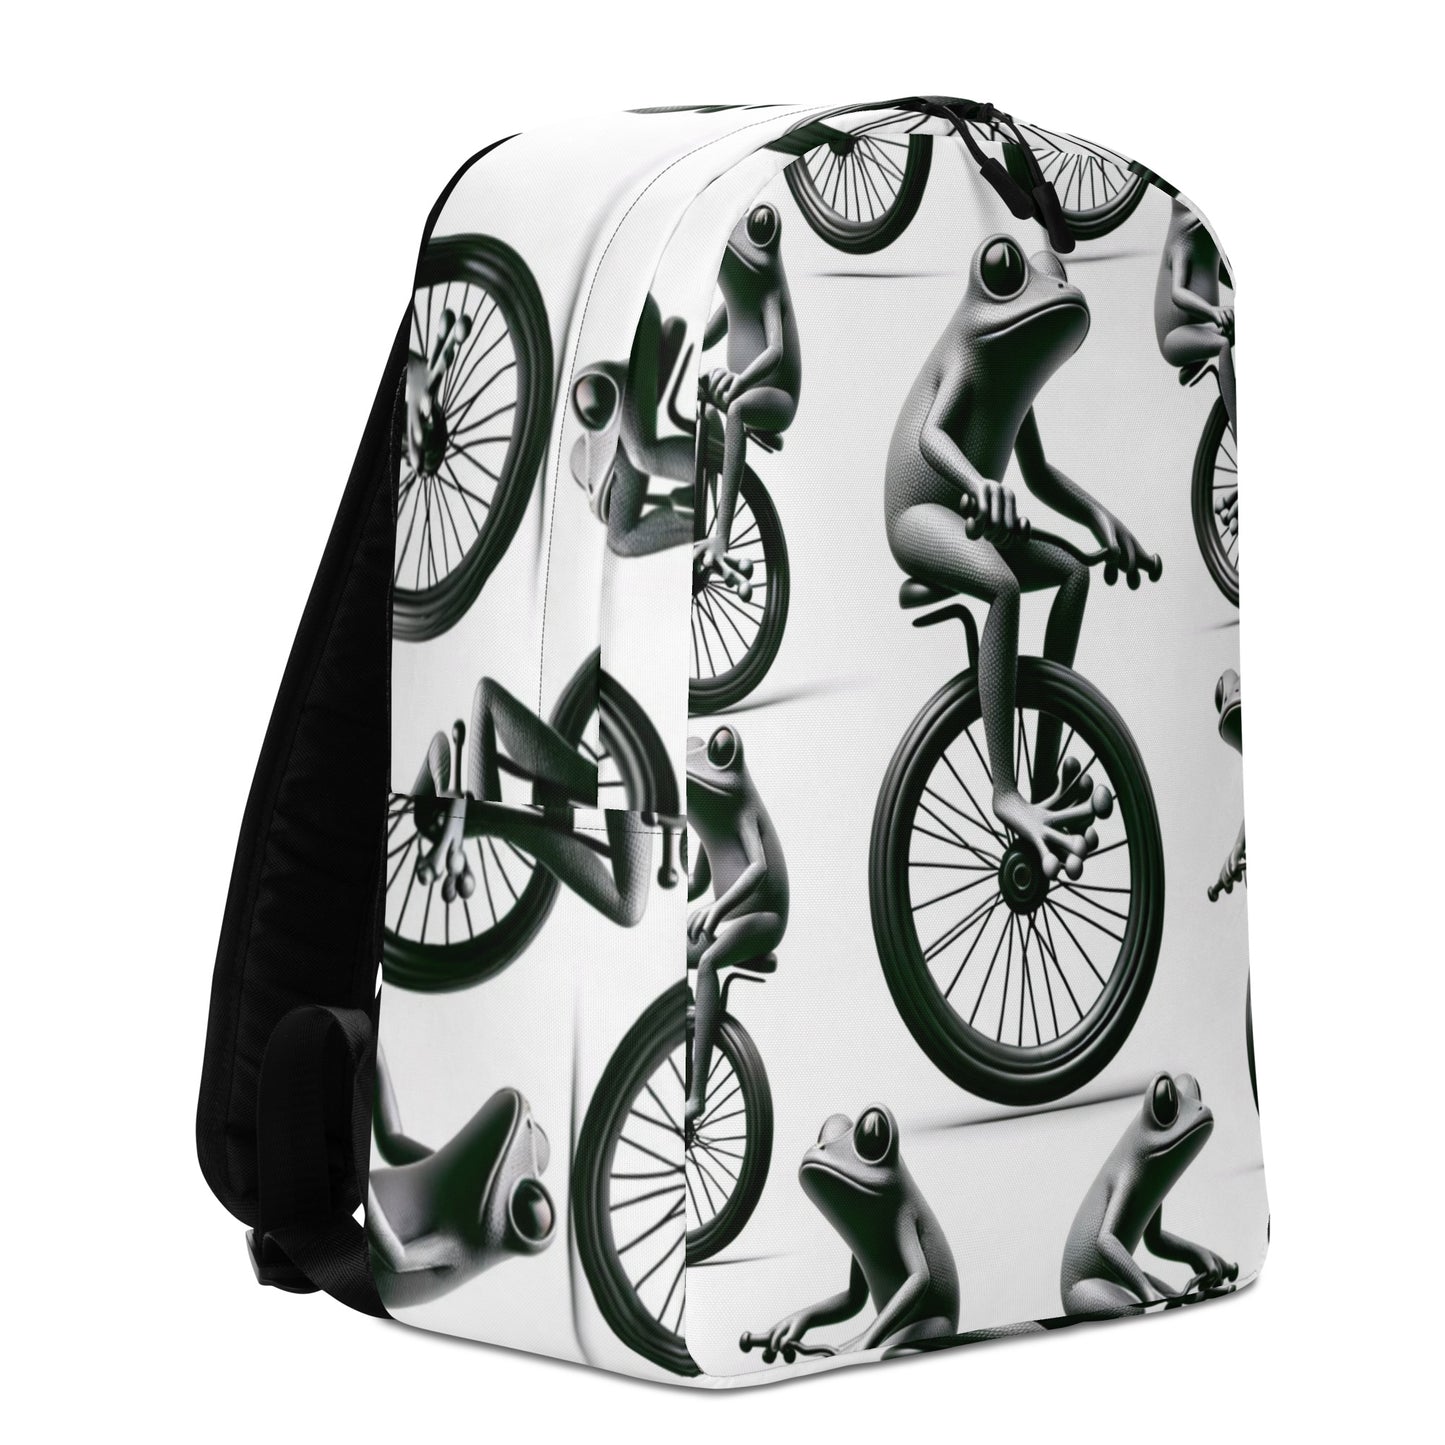 Oh Snap Whaddup Frog On Unicycle Minimalist Backpack